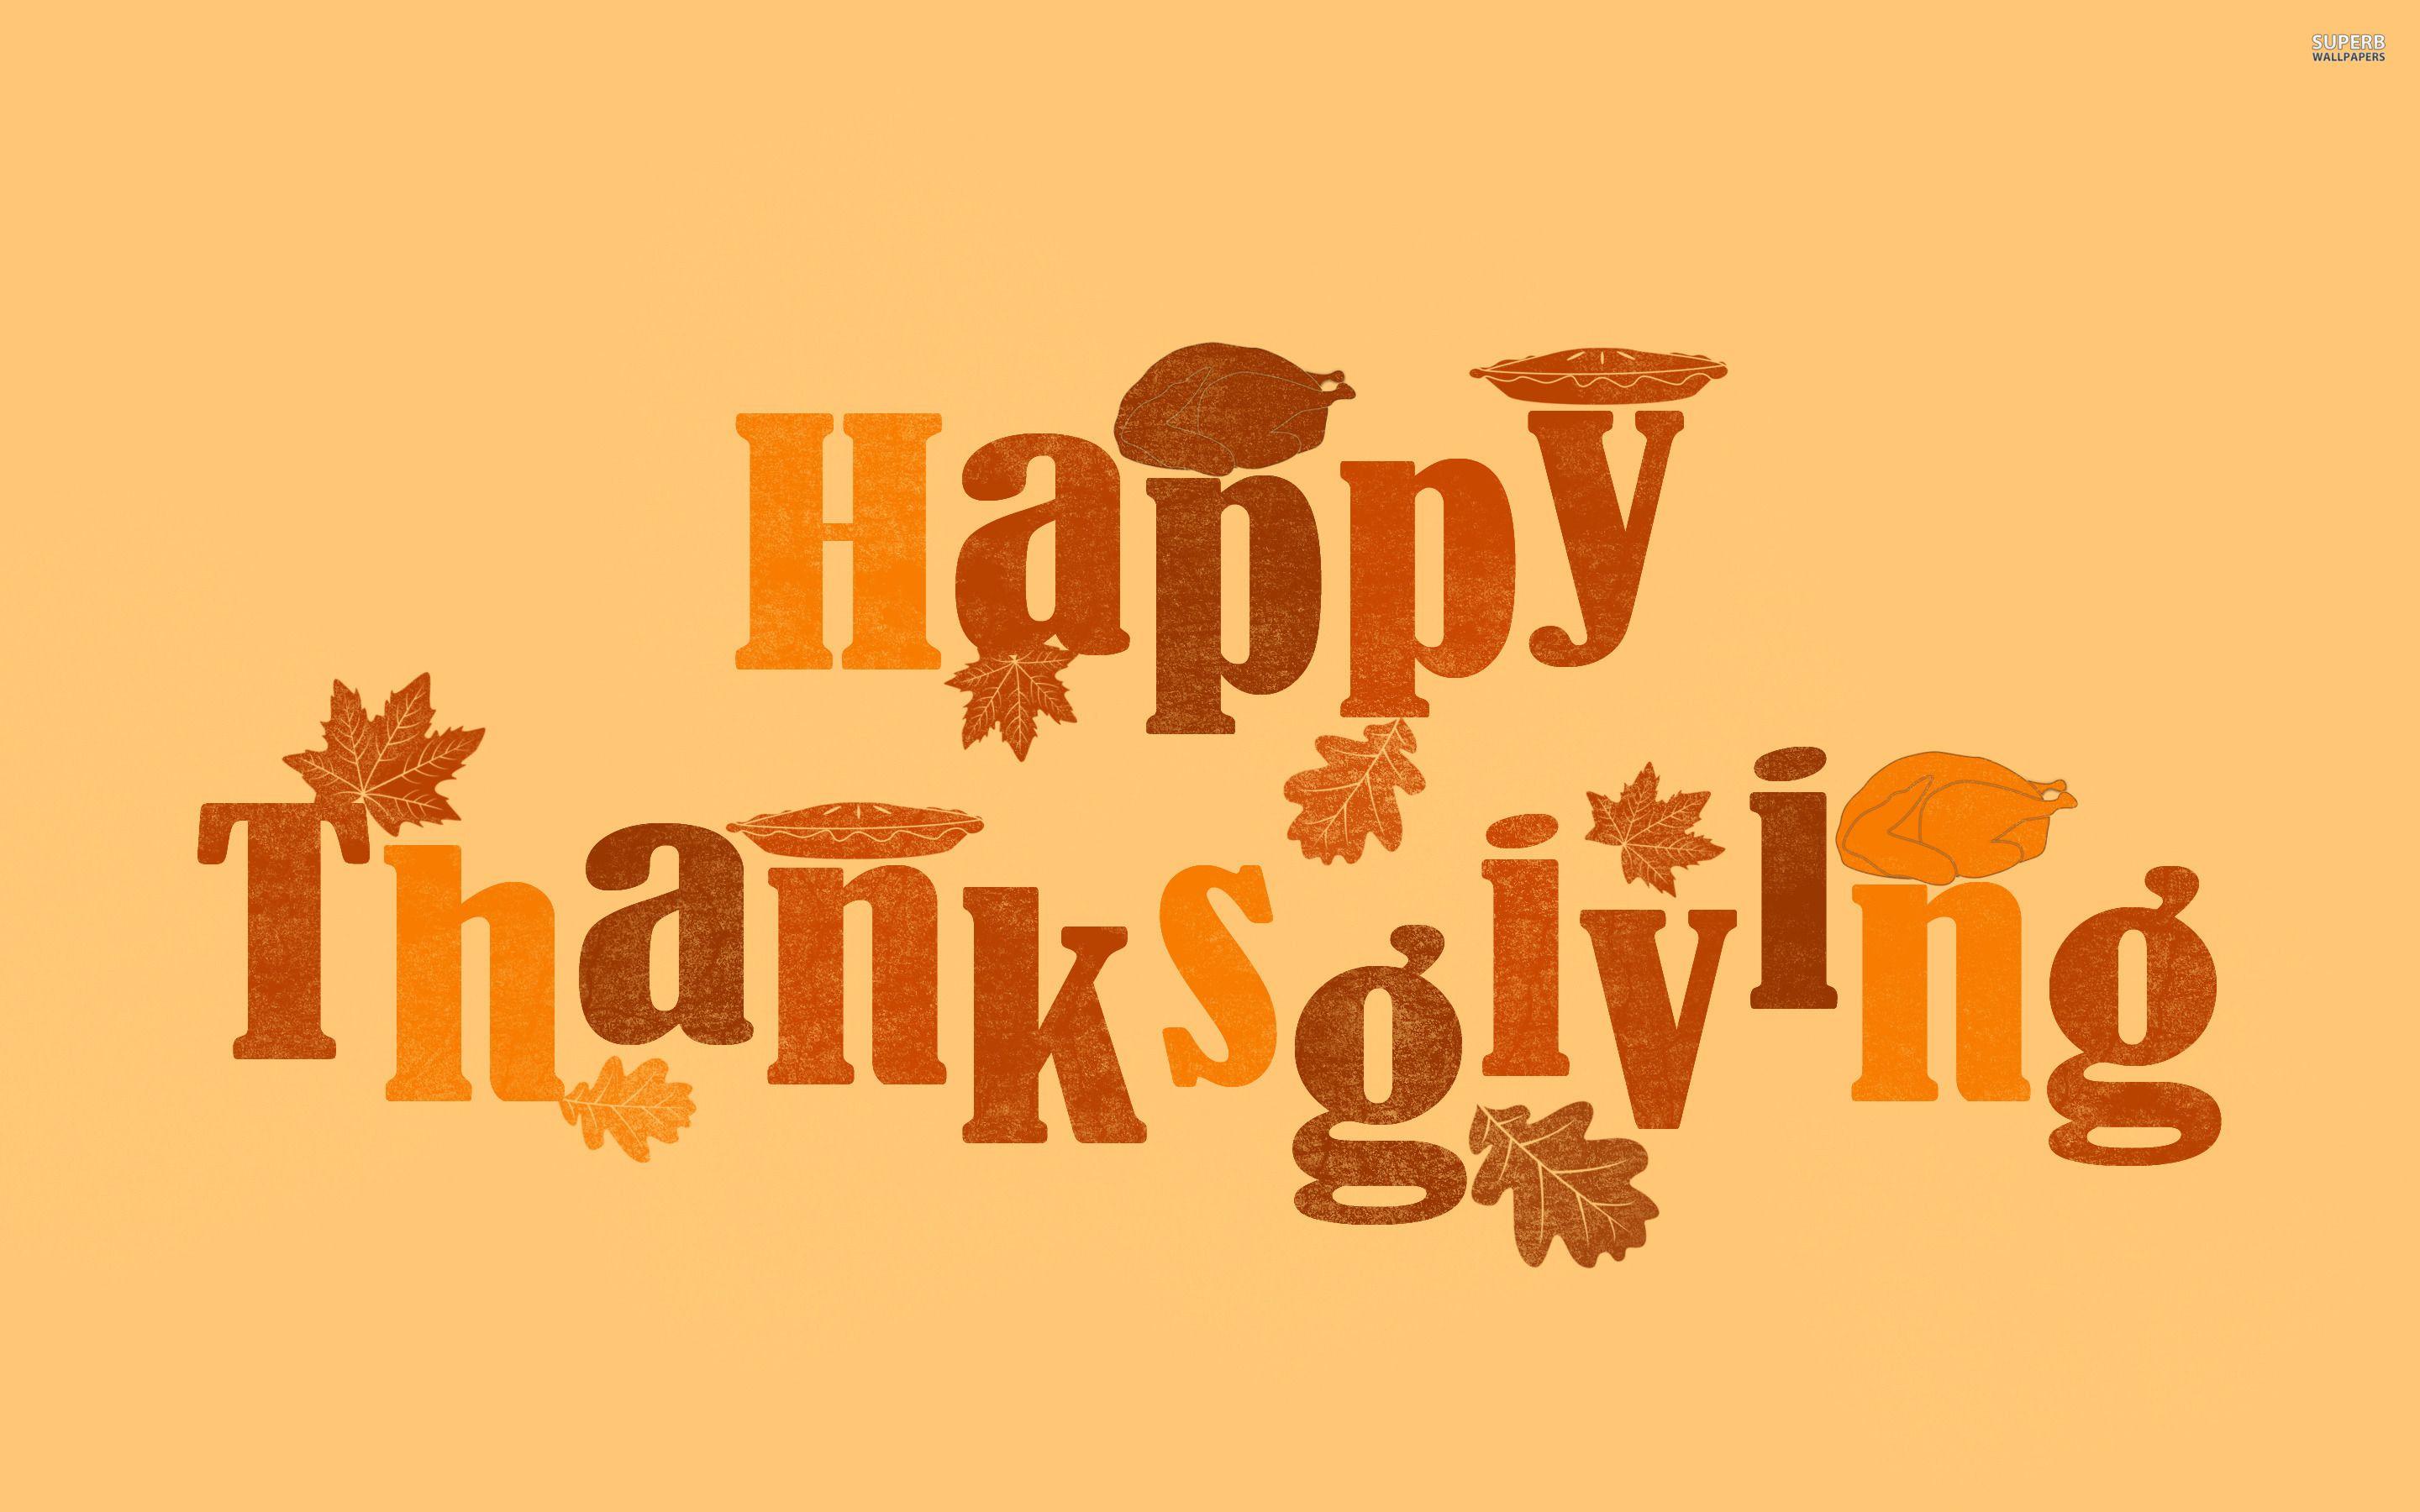 Give Thanks Wallpaper  Happy thanksgiving wallpaper Thanksgiving wallpaper  November wallpaper